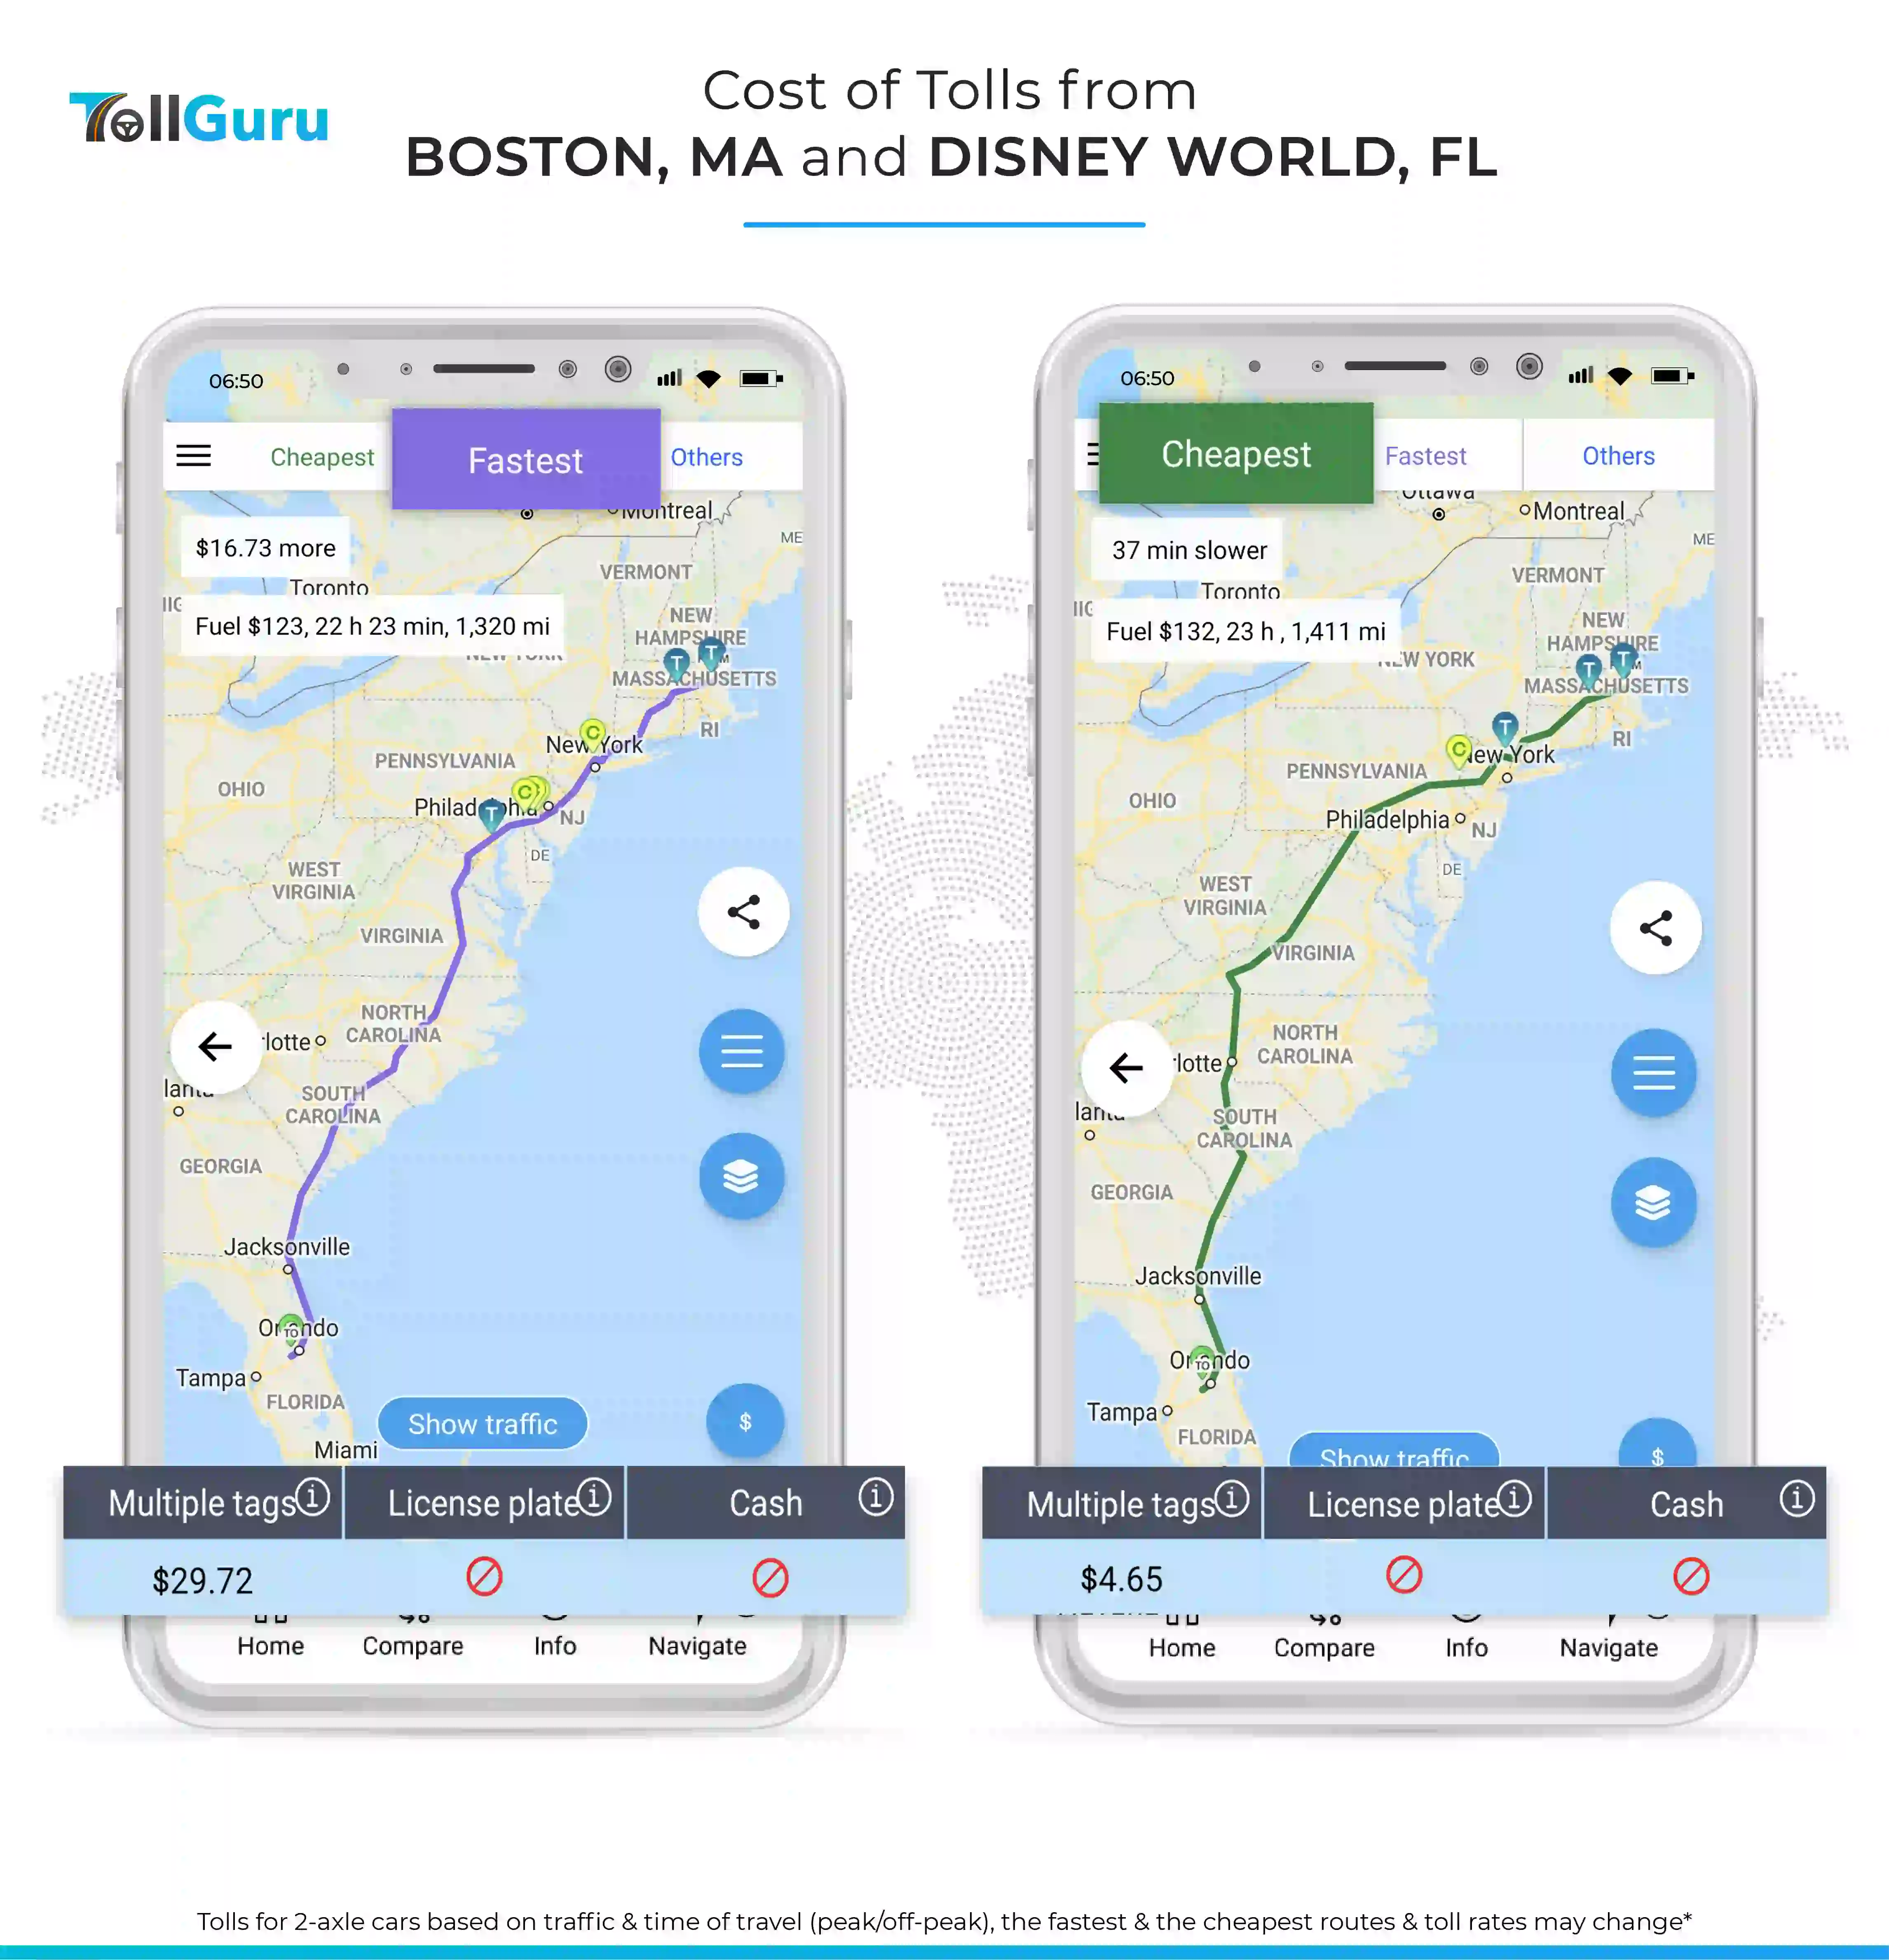 Tolls and fuel cost to travel by car from Boston to Disney World, FL along typical fast route and cheap route.